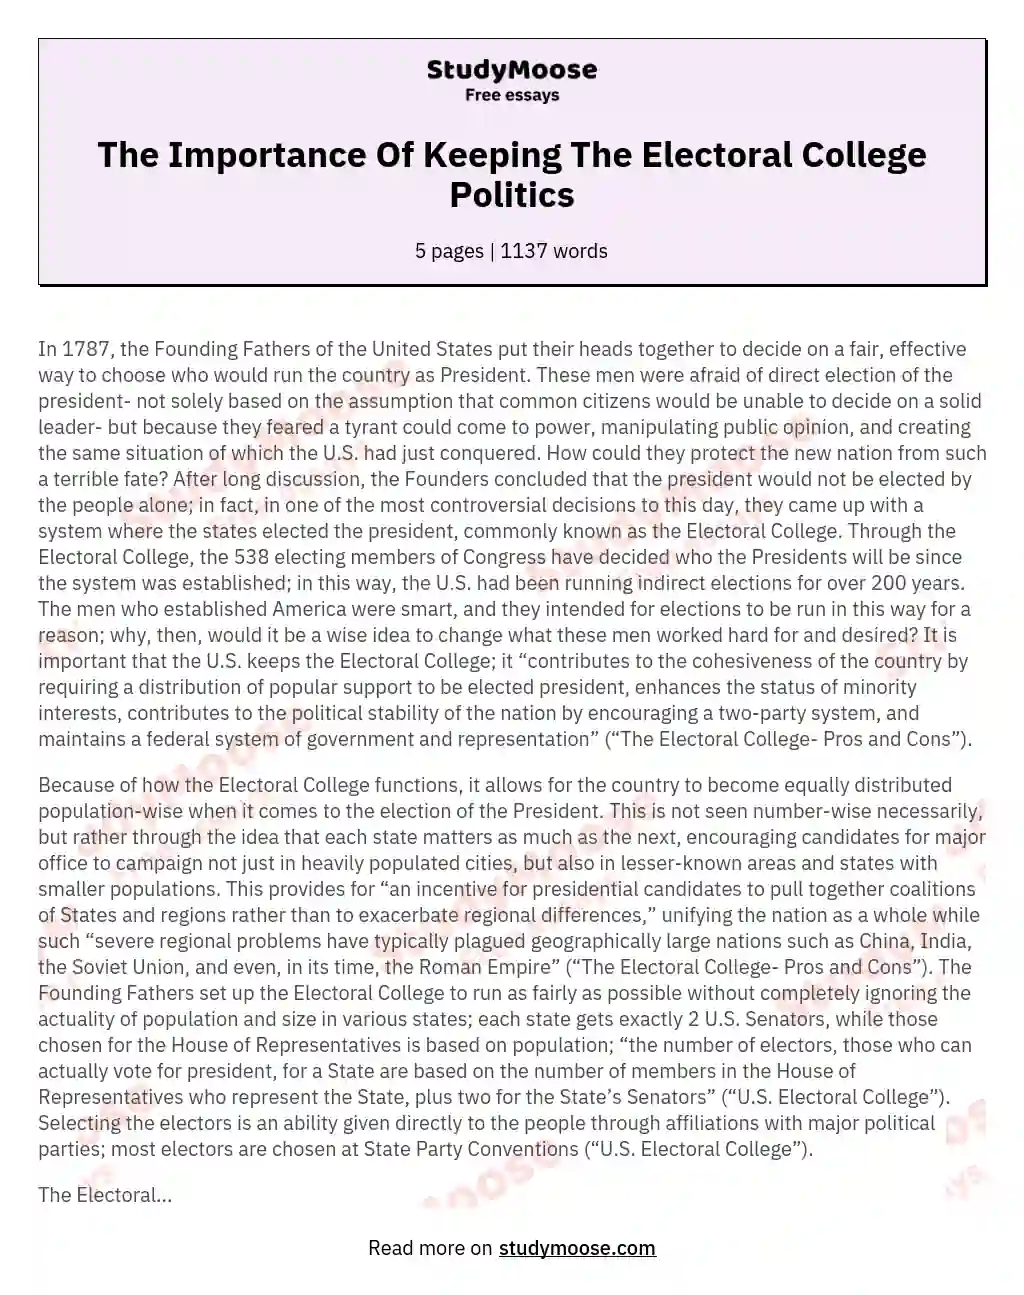 The Importance Of Keeping The Electoral College Politics essay